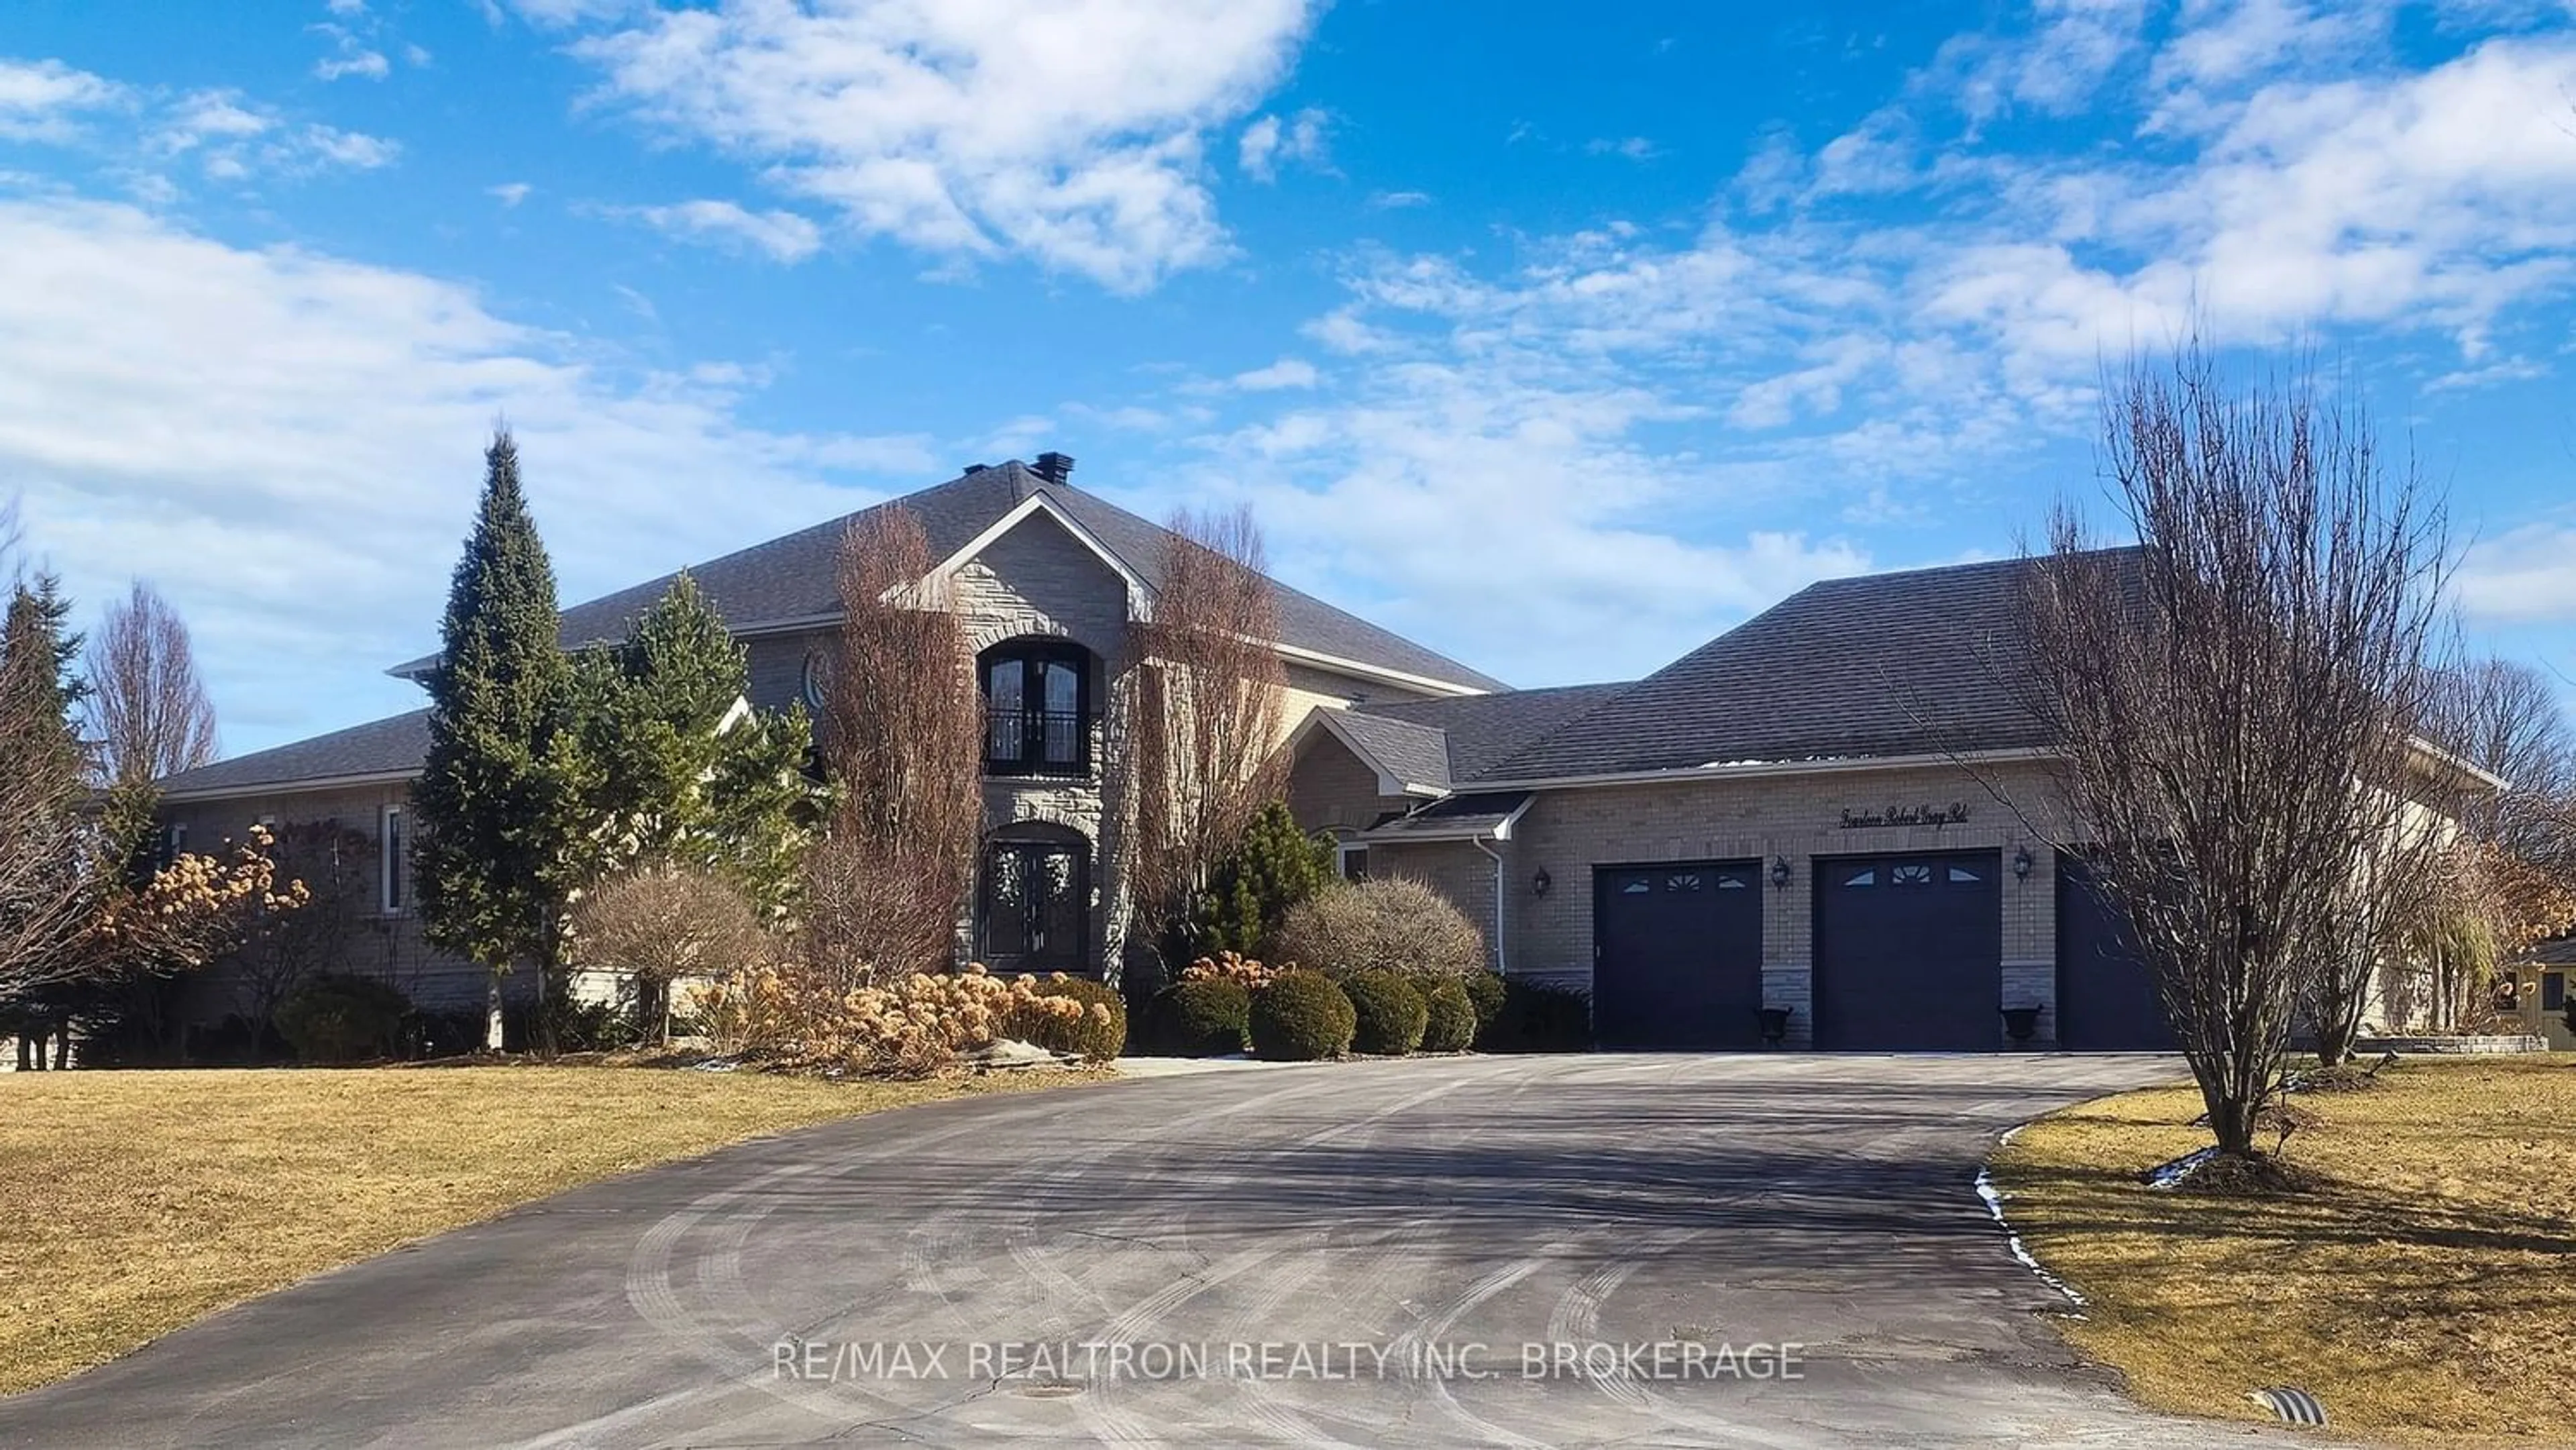 Frontside or backside of a home for 14 Robertgray Rd, Whitchurch-Stouffville Ontario L4A 1M4